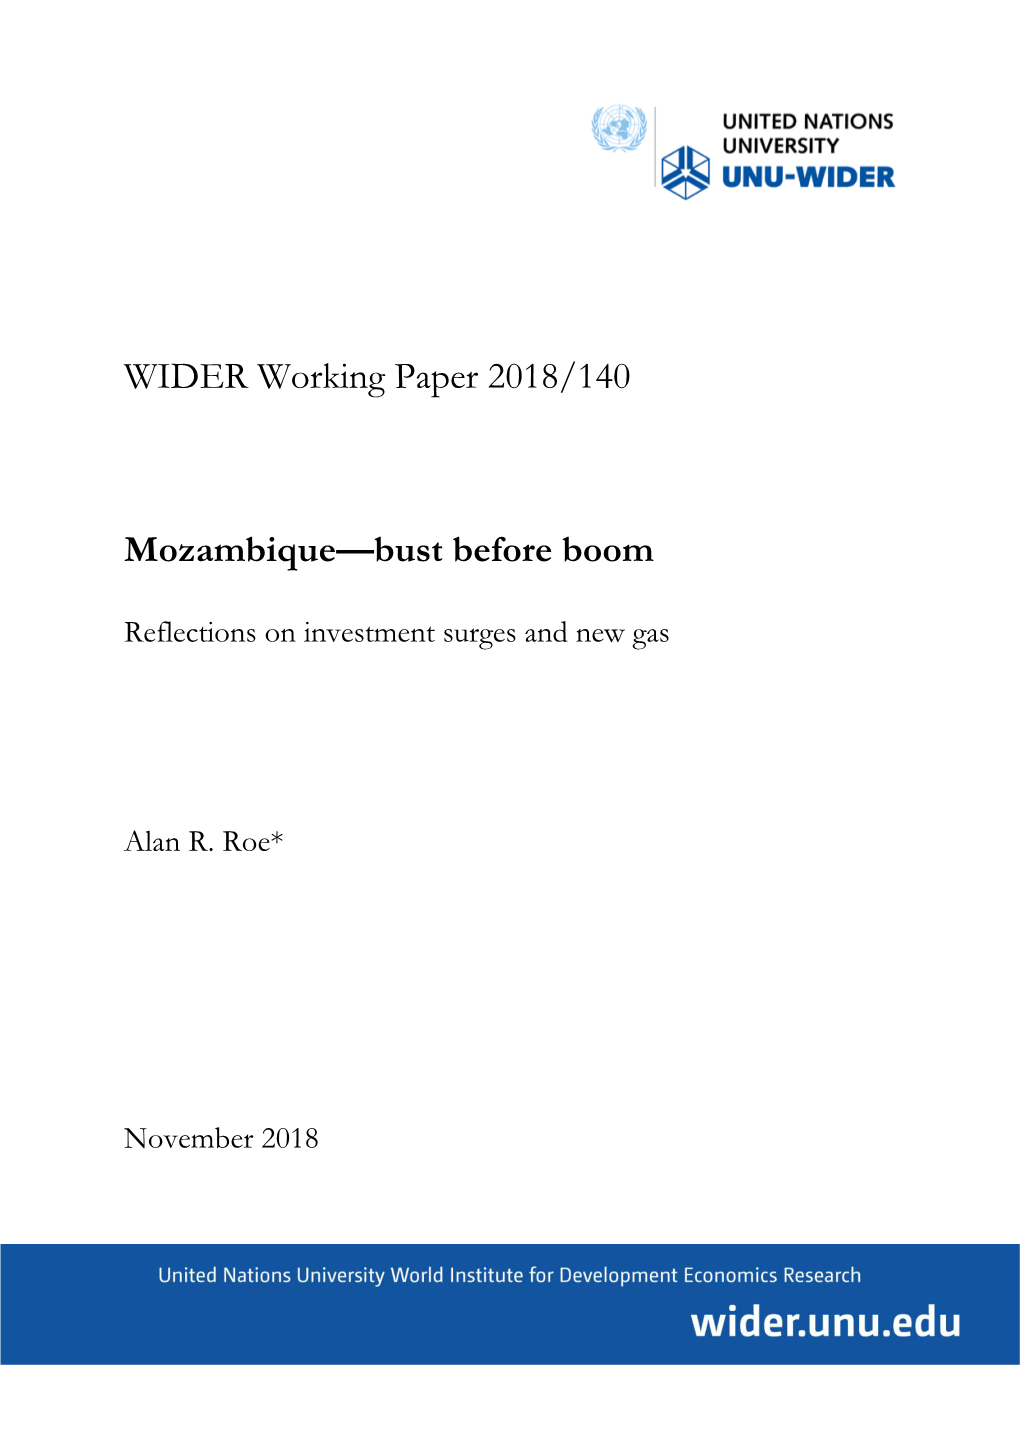 WIDER Working Paper 2018/140: Mozambique—Bust Before Boom